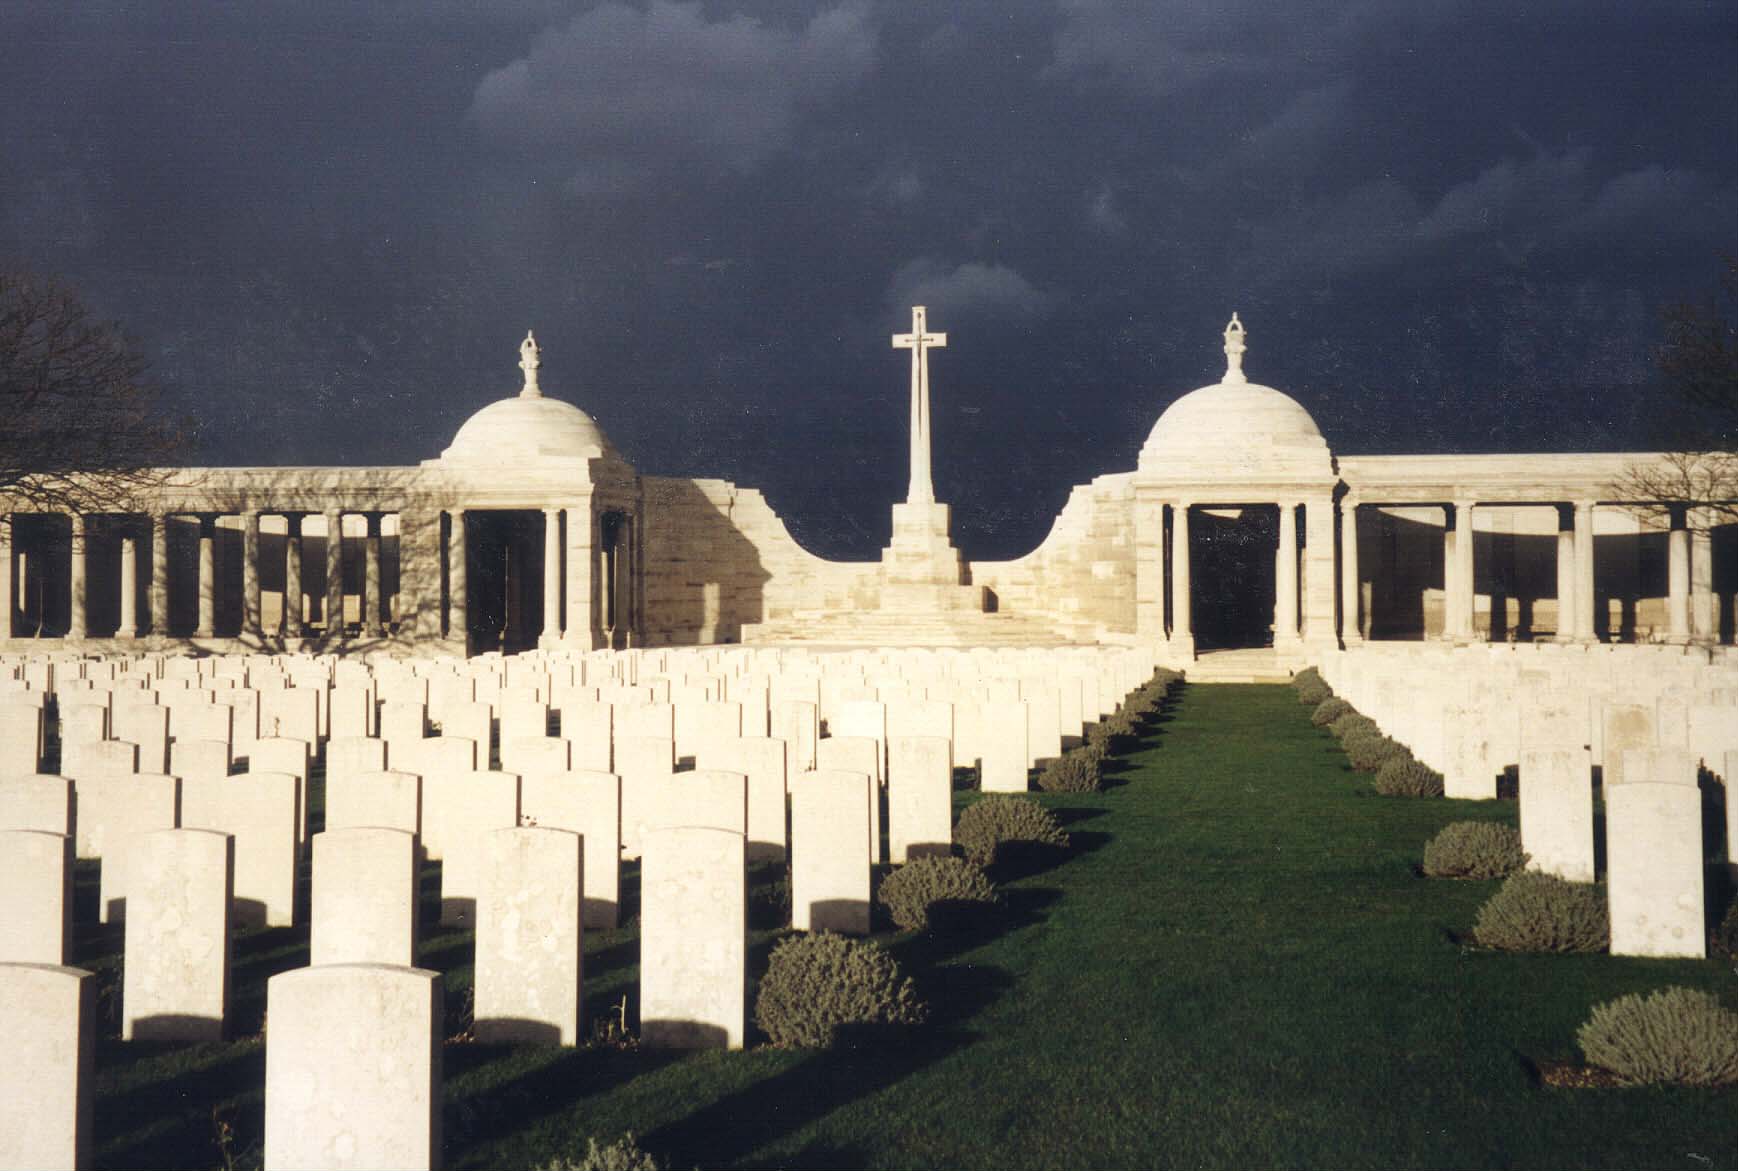 Photo ofLoos Memorial. Rows of white headstones in front of a central cross memorial with walls of columns either side.